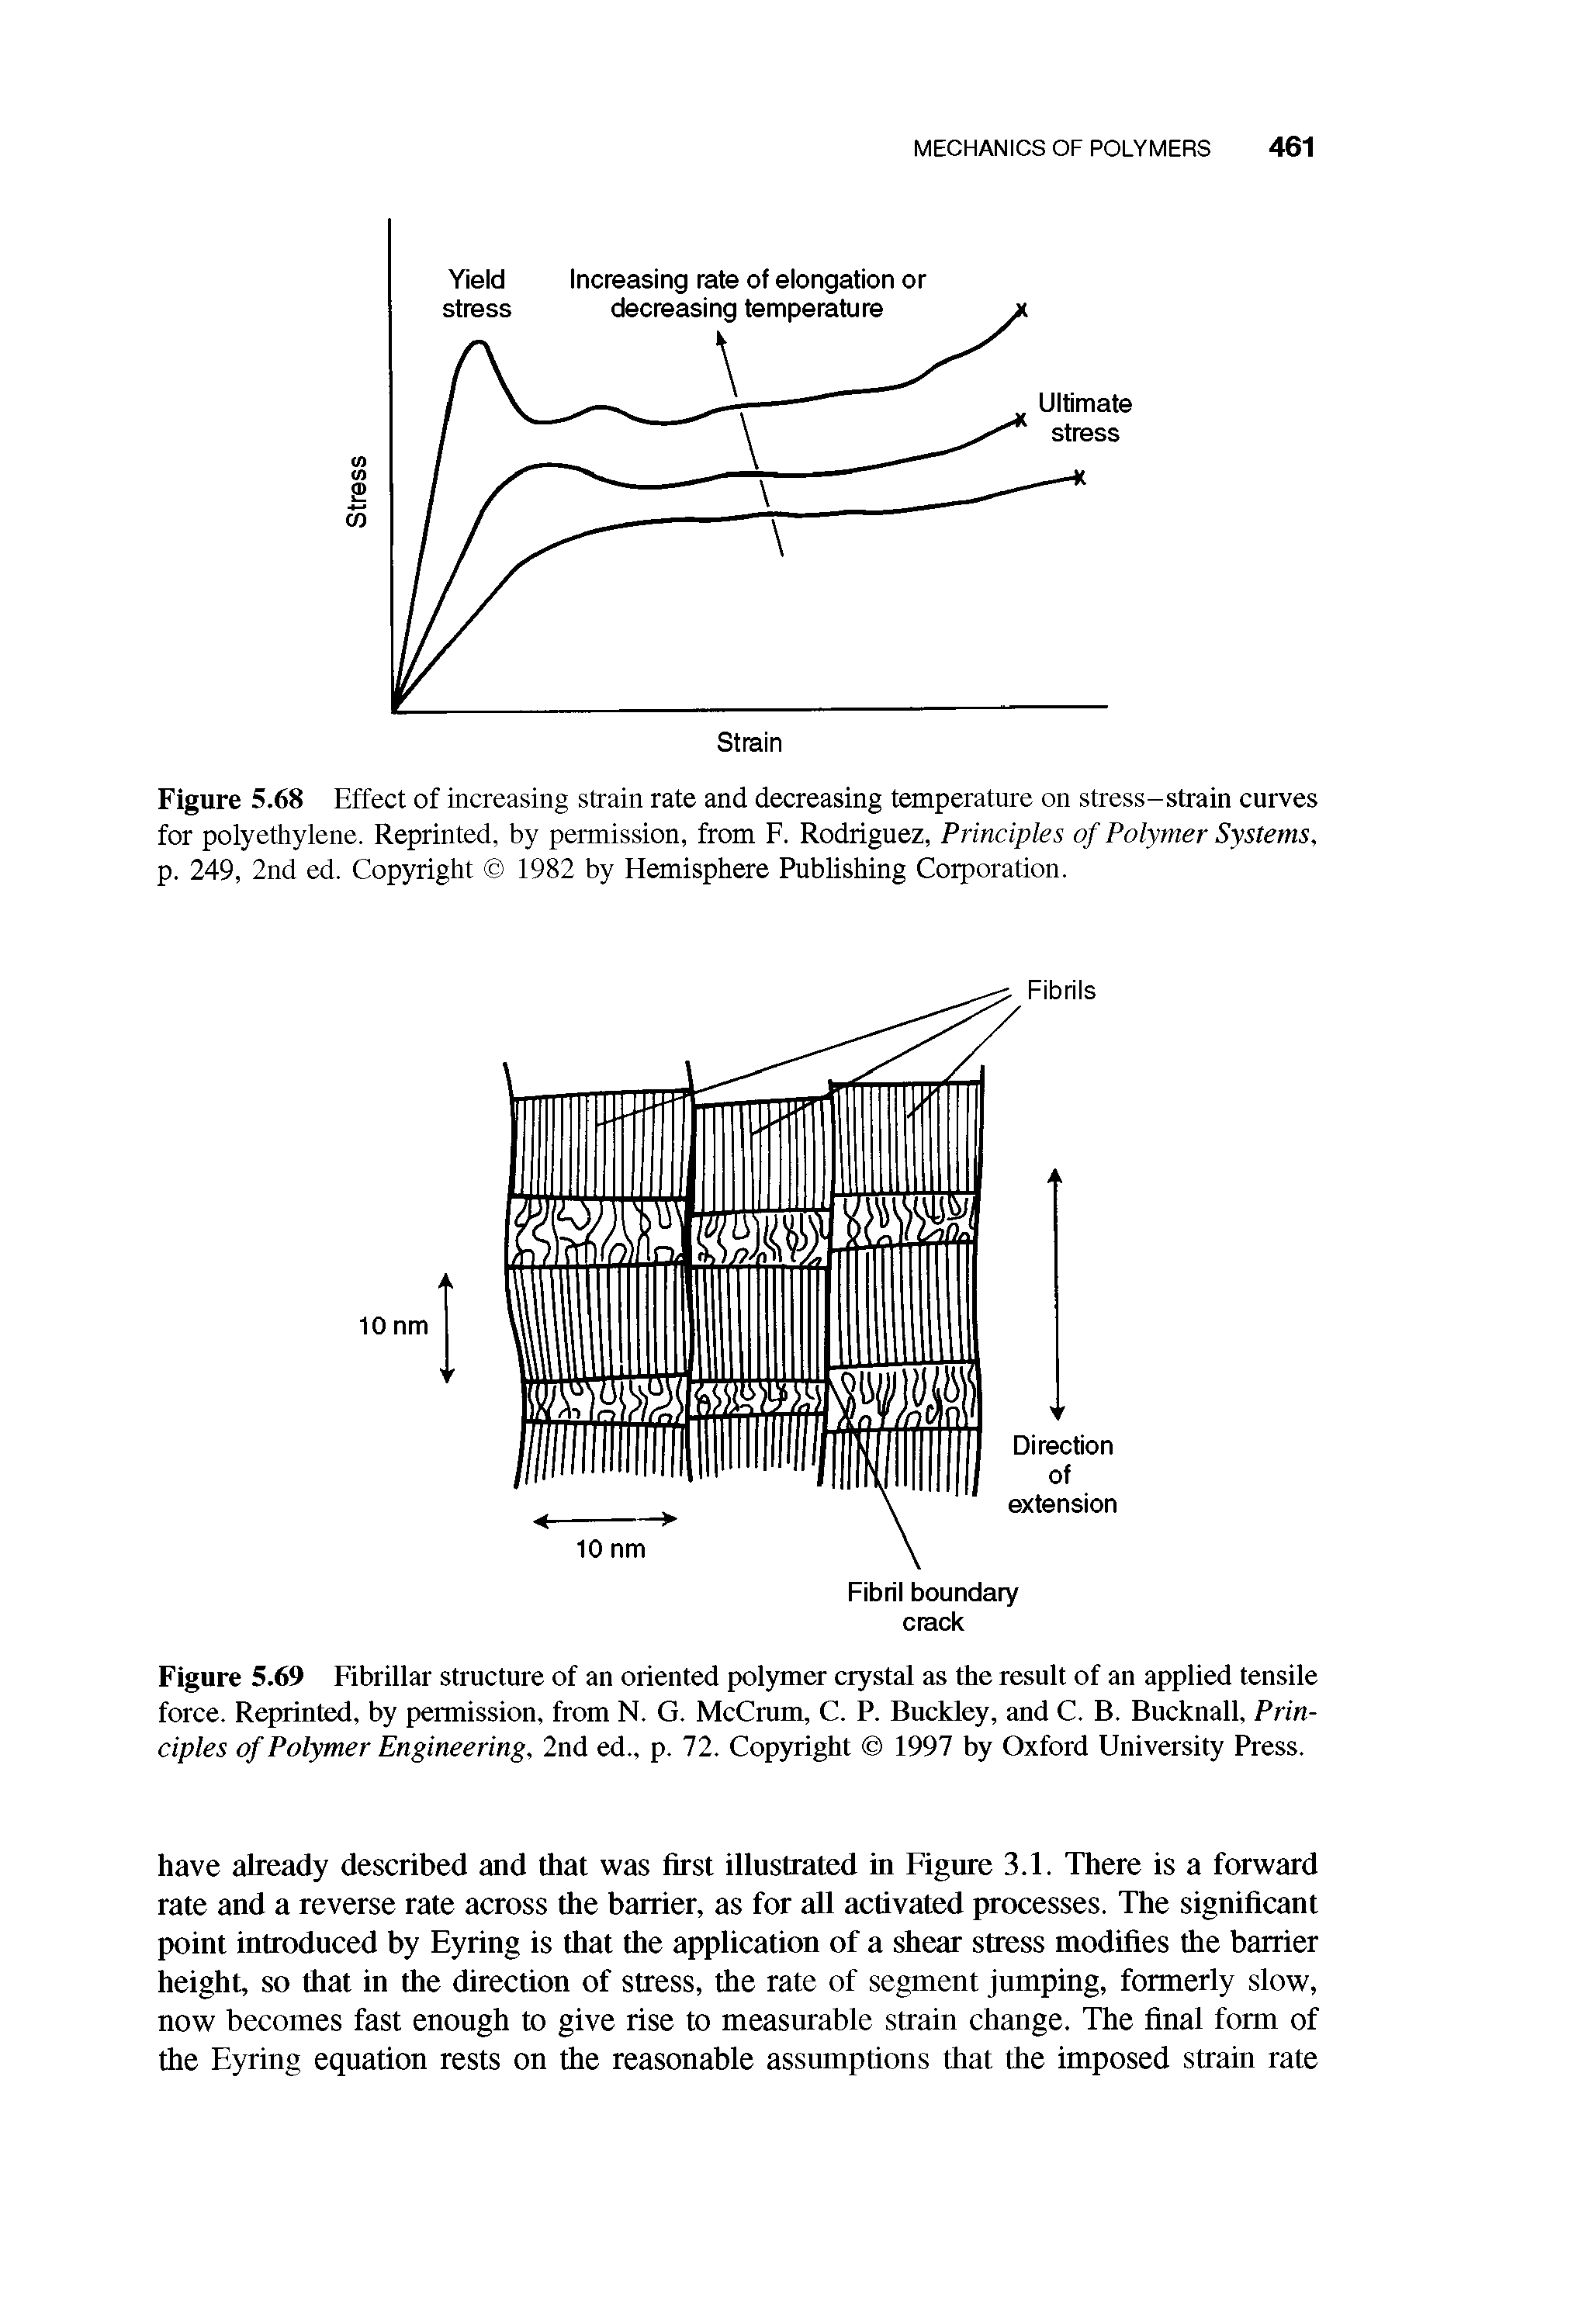 Figure 5.69 Fibrillar structure of an oriented polymer crystal as the result of an applied tensile force. Reprinted, by permission, from N. G. McCrum, C. P. Buckley, and C. B. Bucknall, Principles of Polymer Engineering, 2nd ed., p. 72. Copyright 1997 by Oxford University Press.